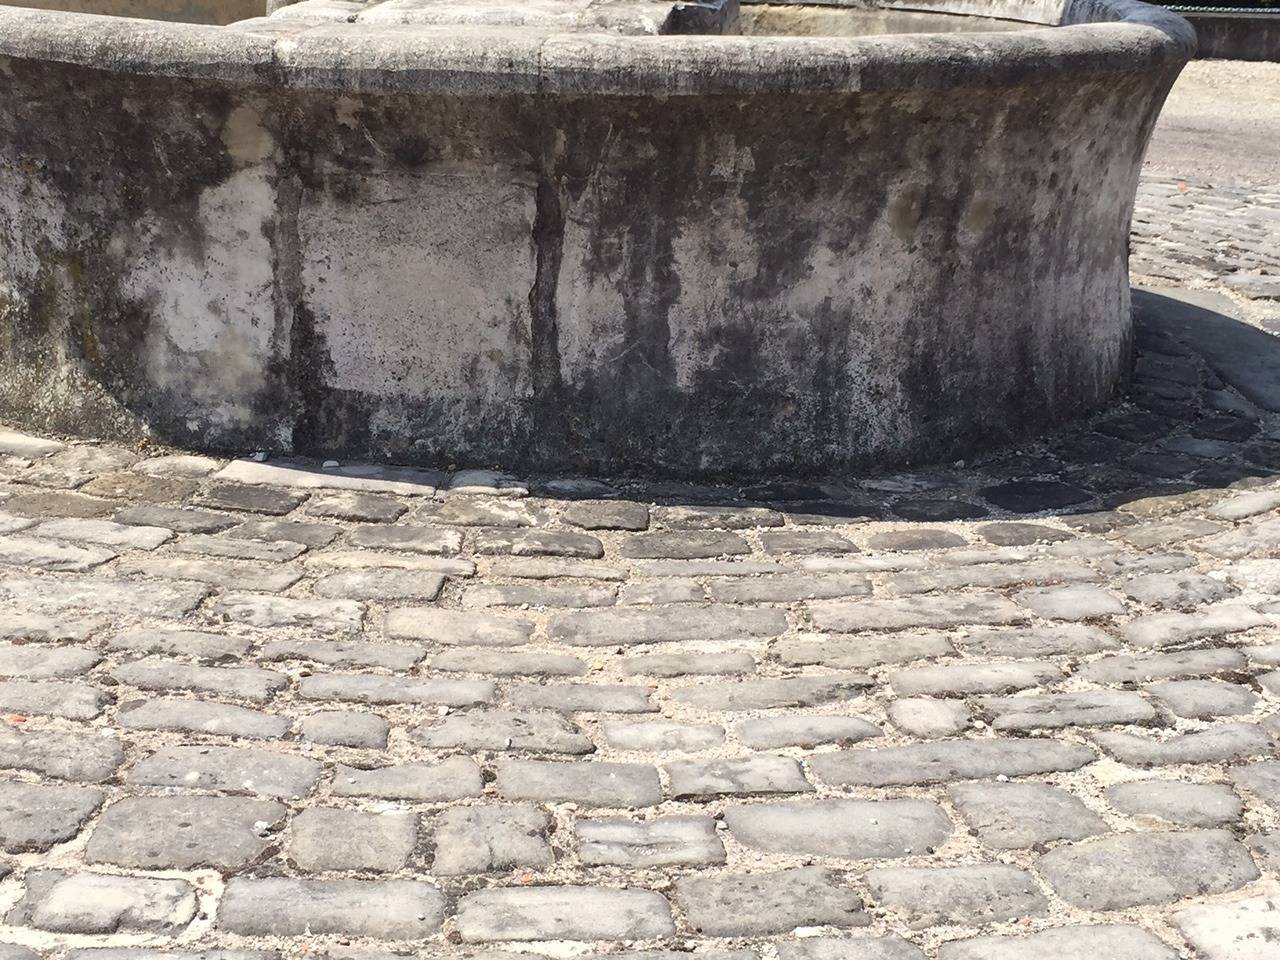 Authentic, original, rare and unique French antique cobblestone 17th century from Paris, France.
The real ones, the real little Parisian streets floors available right now from our warehouse in Los Angeles.
Packed in NIMP15 wood pallets under US